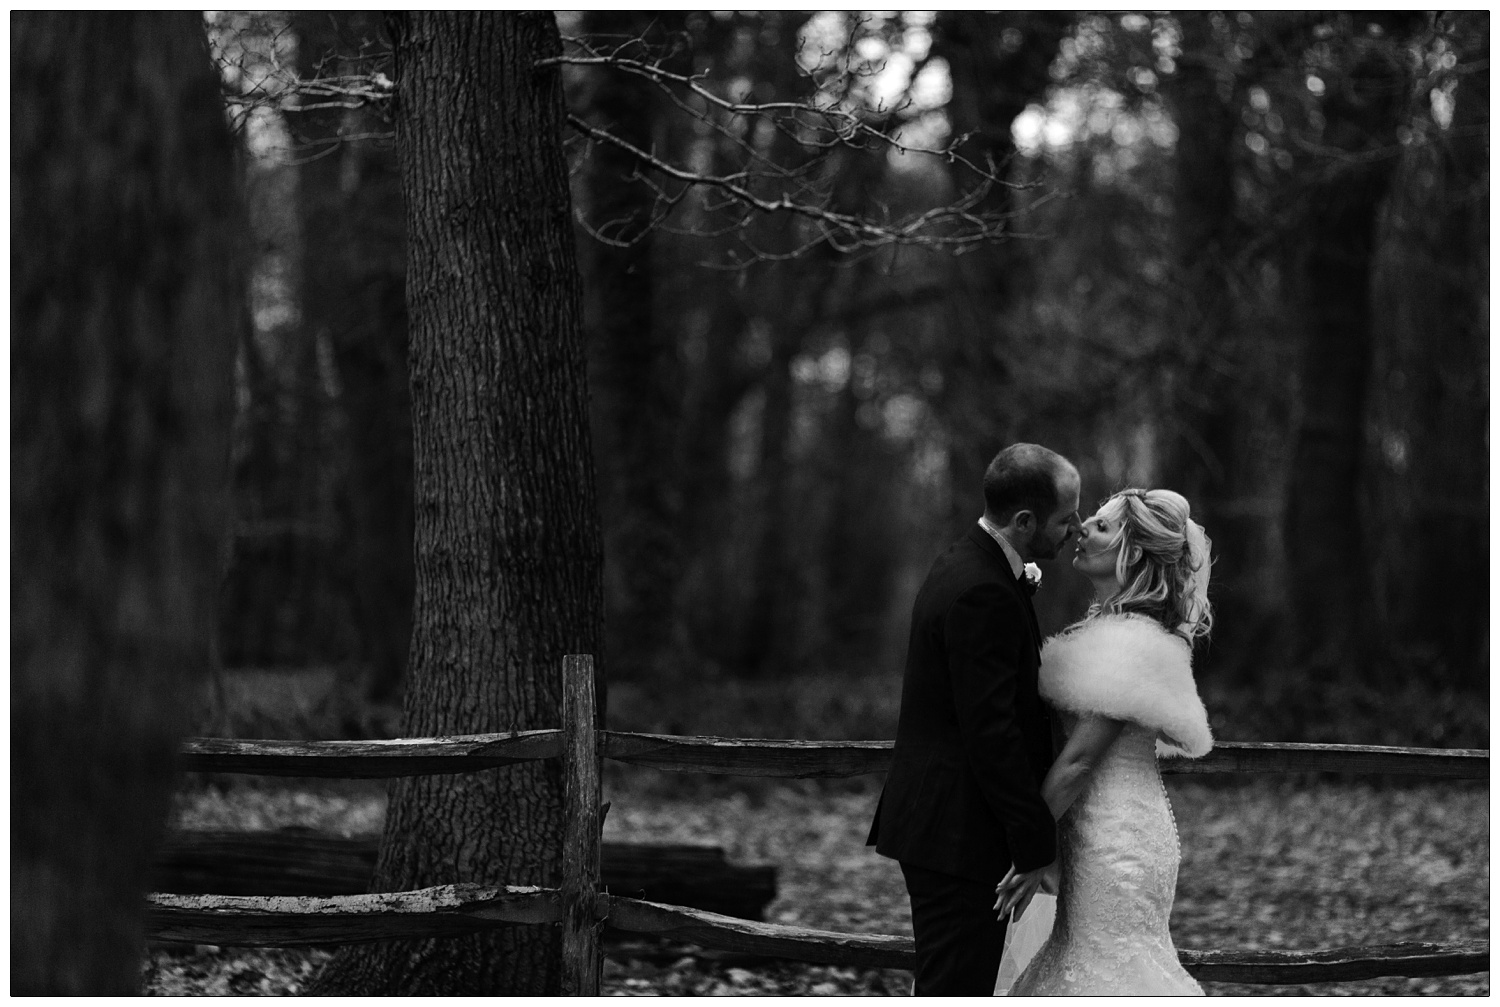 Newly married couple photographs in Hockley woods in December. They are facing each and are about to kiss. There are bare trees in the background and a small fence.